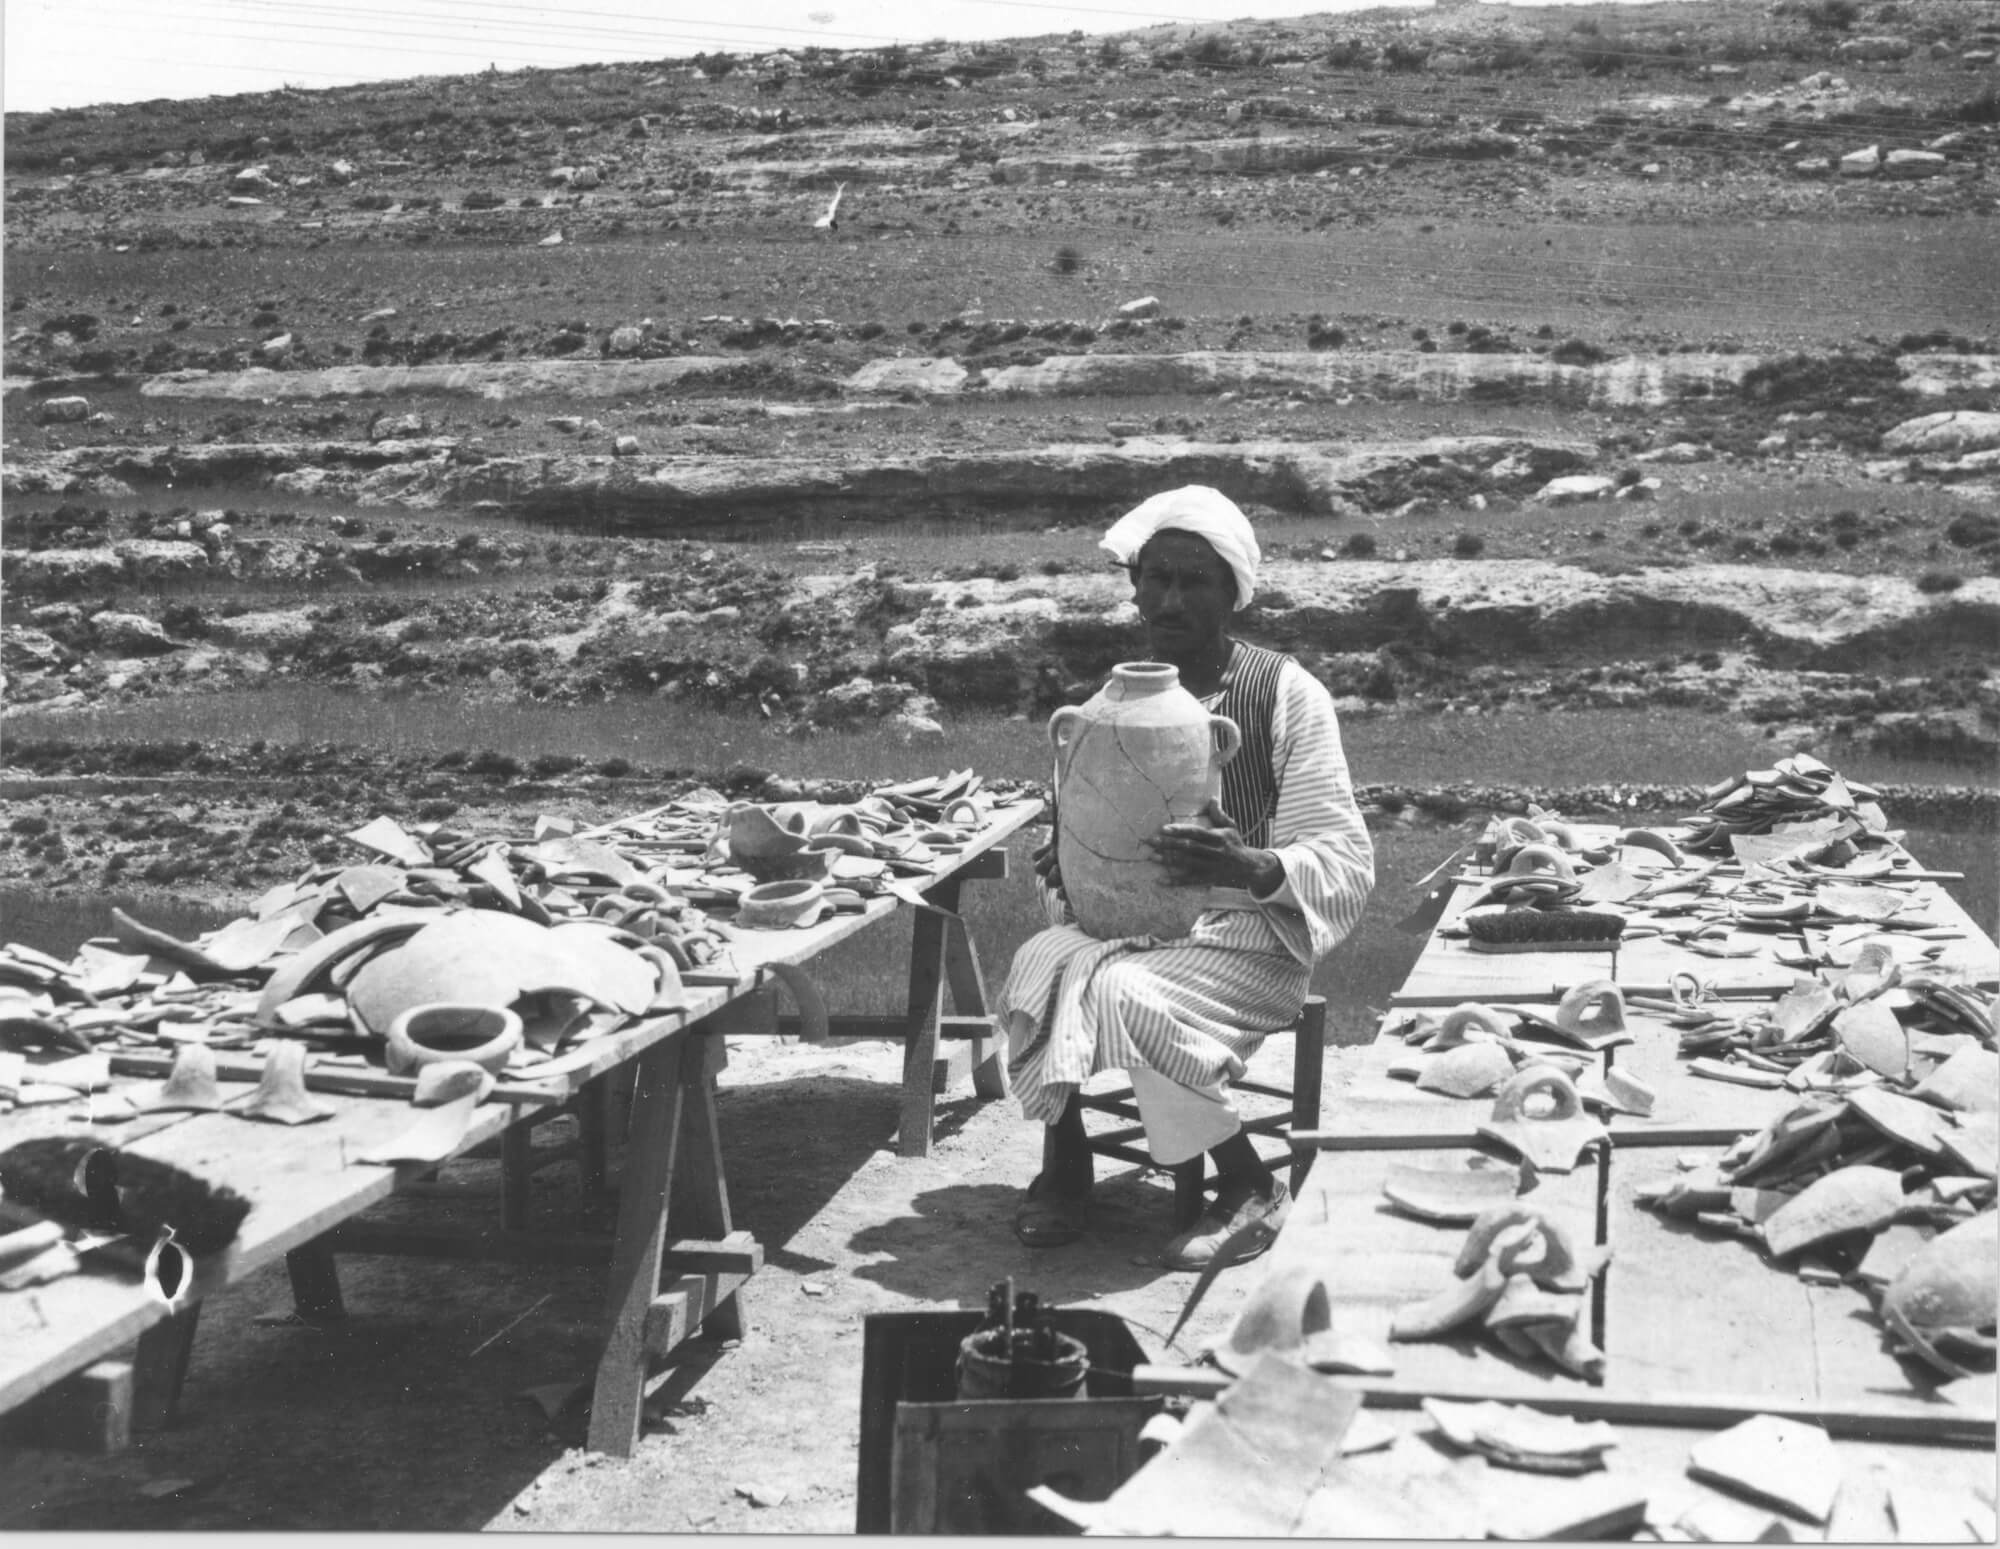 Figure 8. Reis Tantawi restoring pottery on the terrace at Maloufiya, 1932. Badè Museum photographic archive A920. Photographic negative. Courtesy of the Badè Museum, Pacific School of Religion.